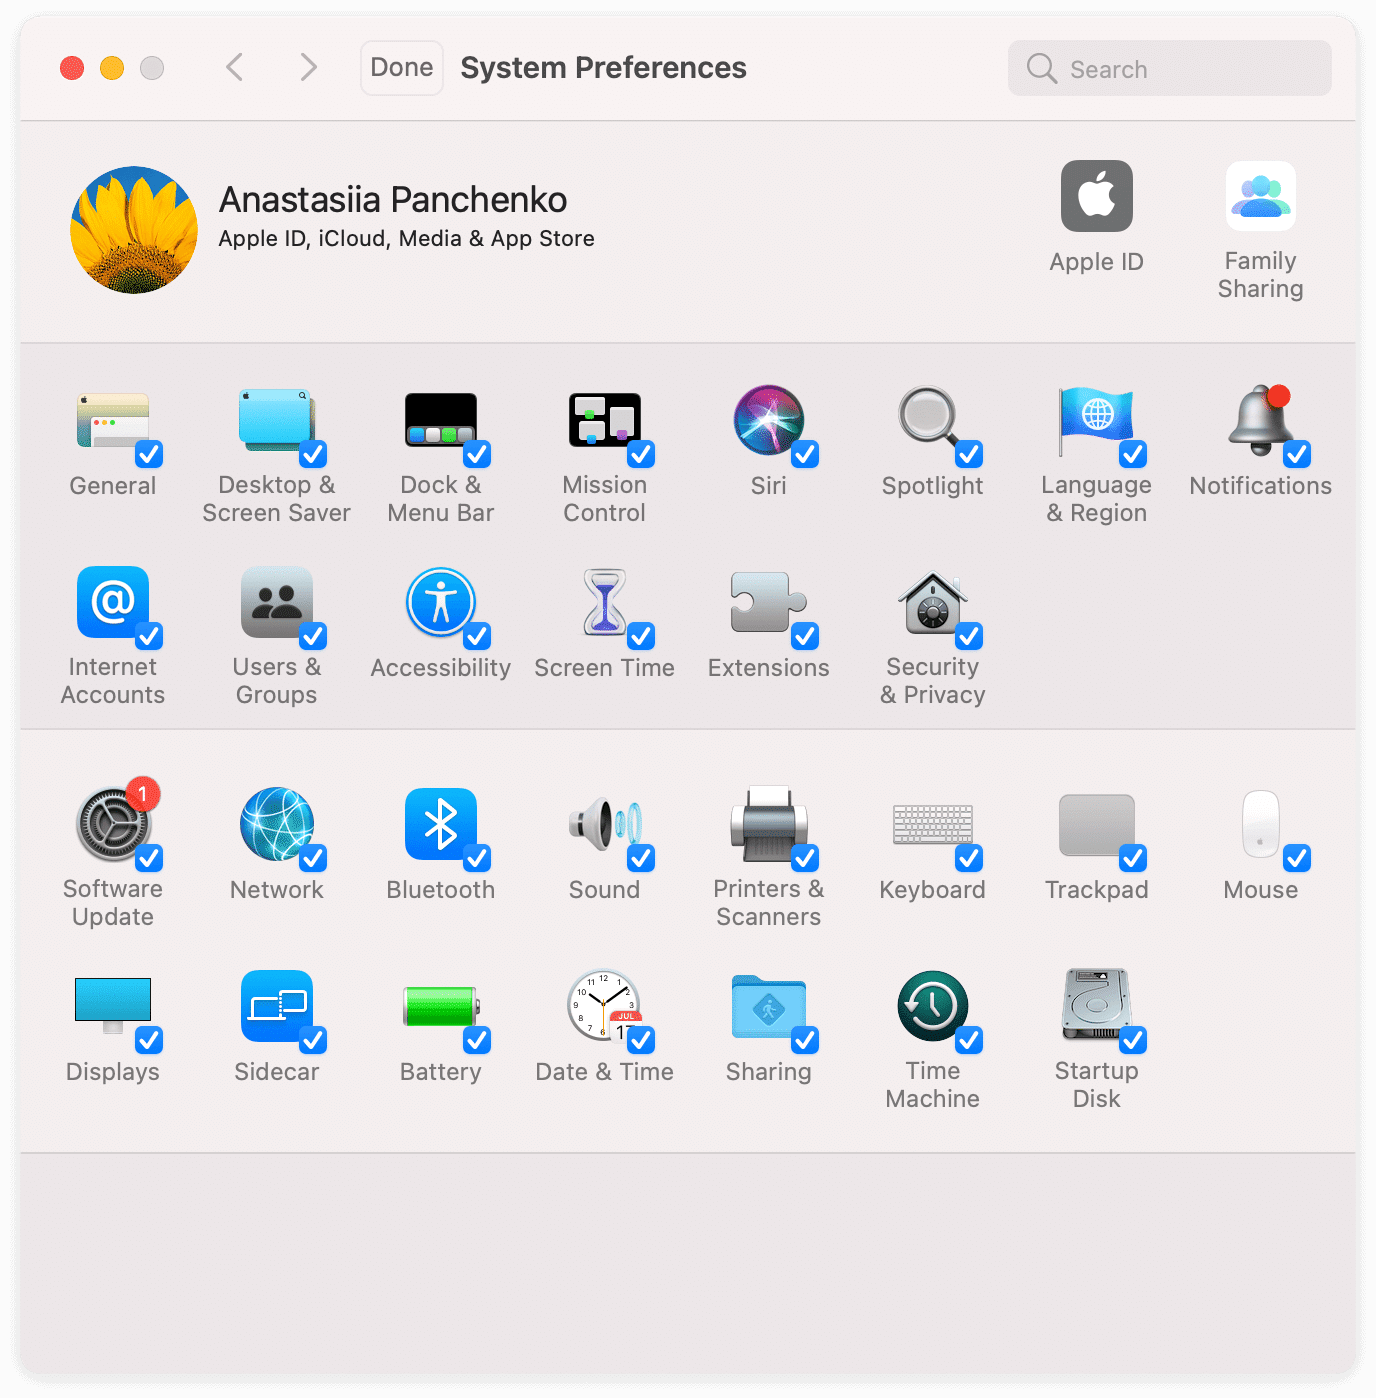 System preferences window showing categories